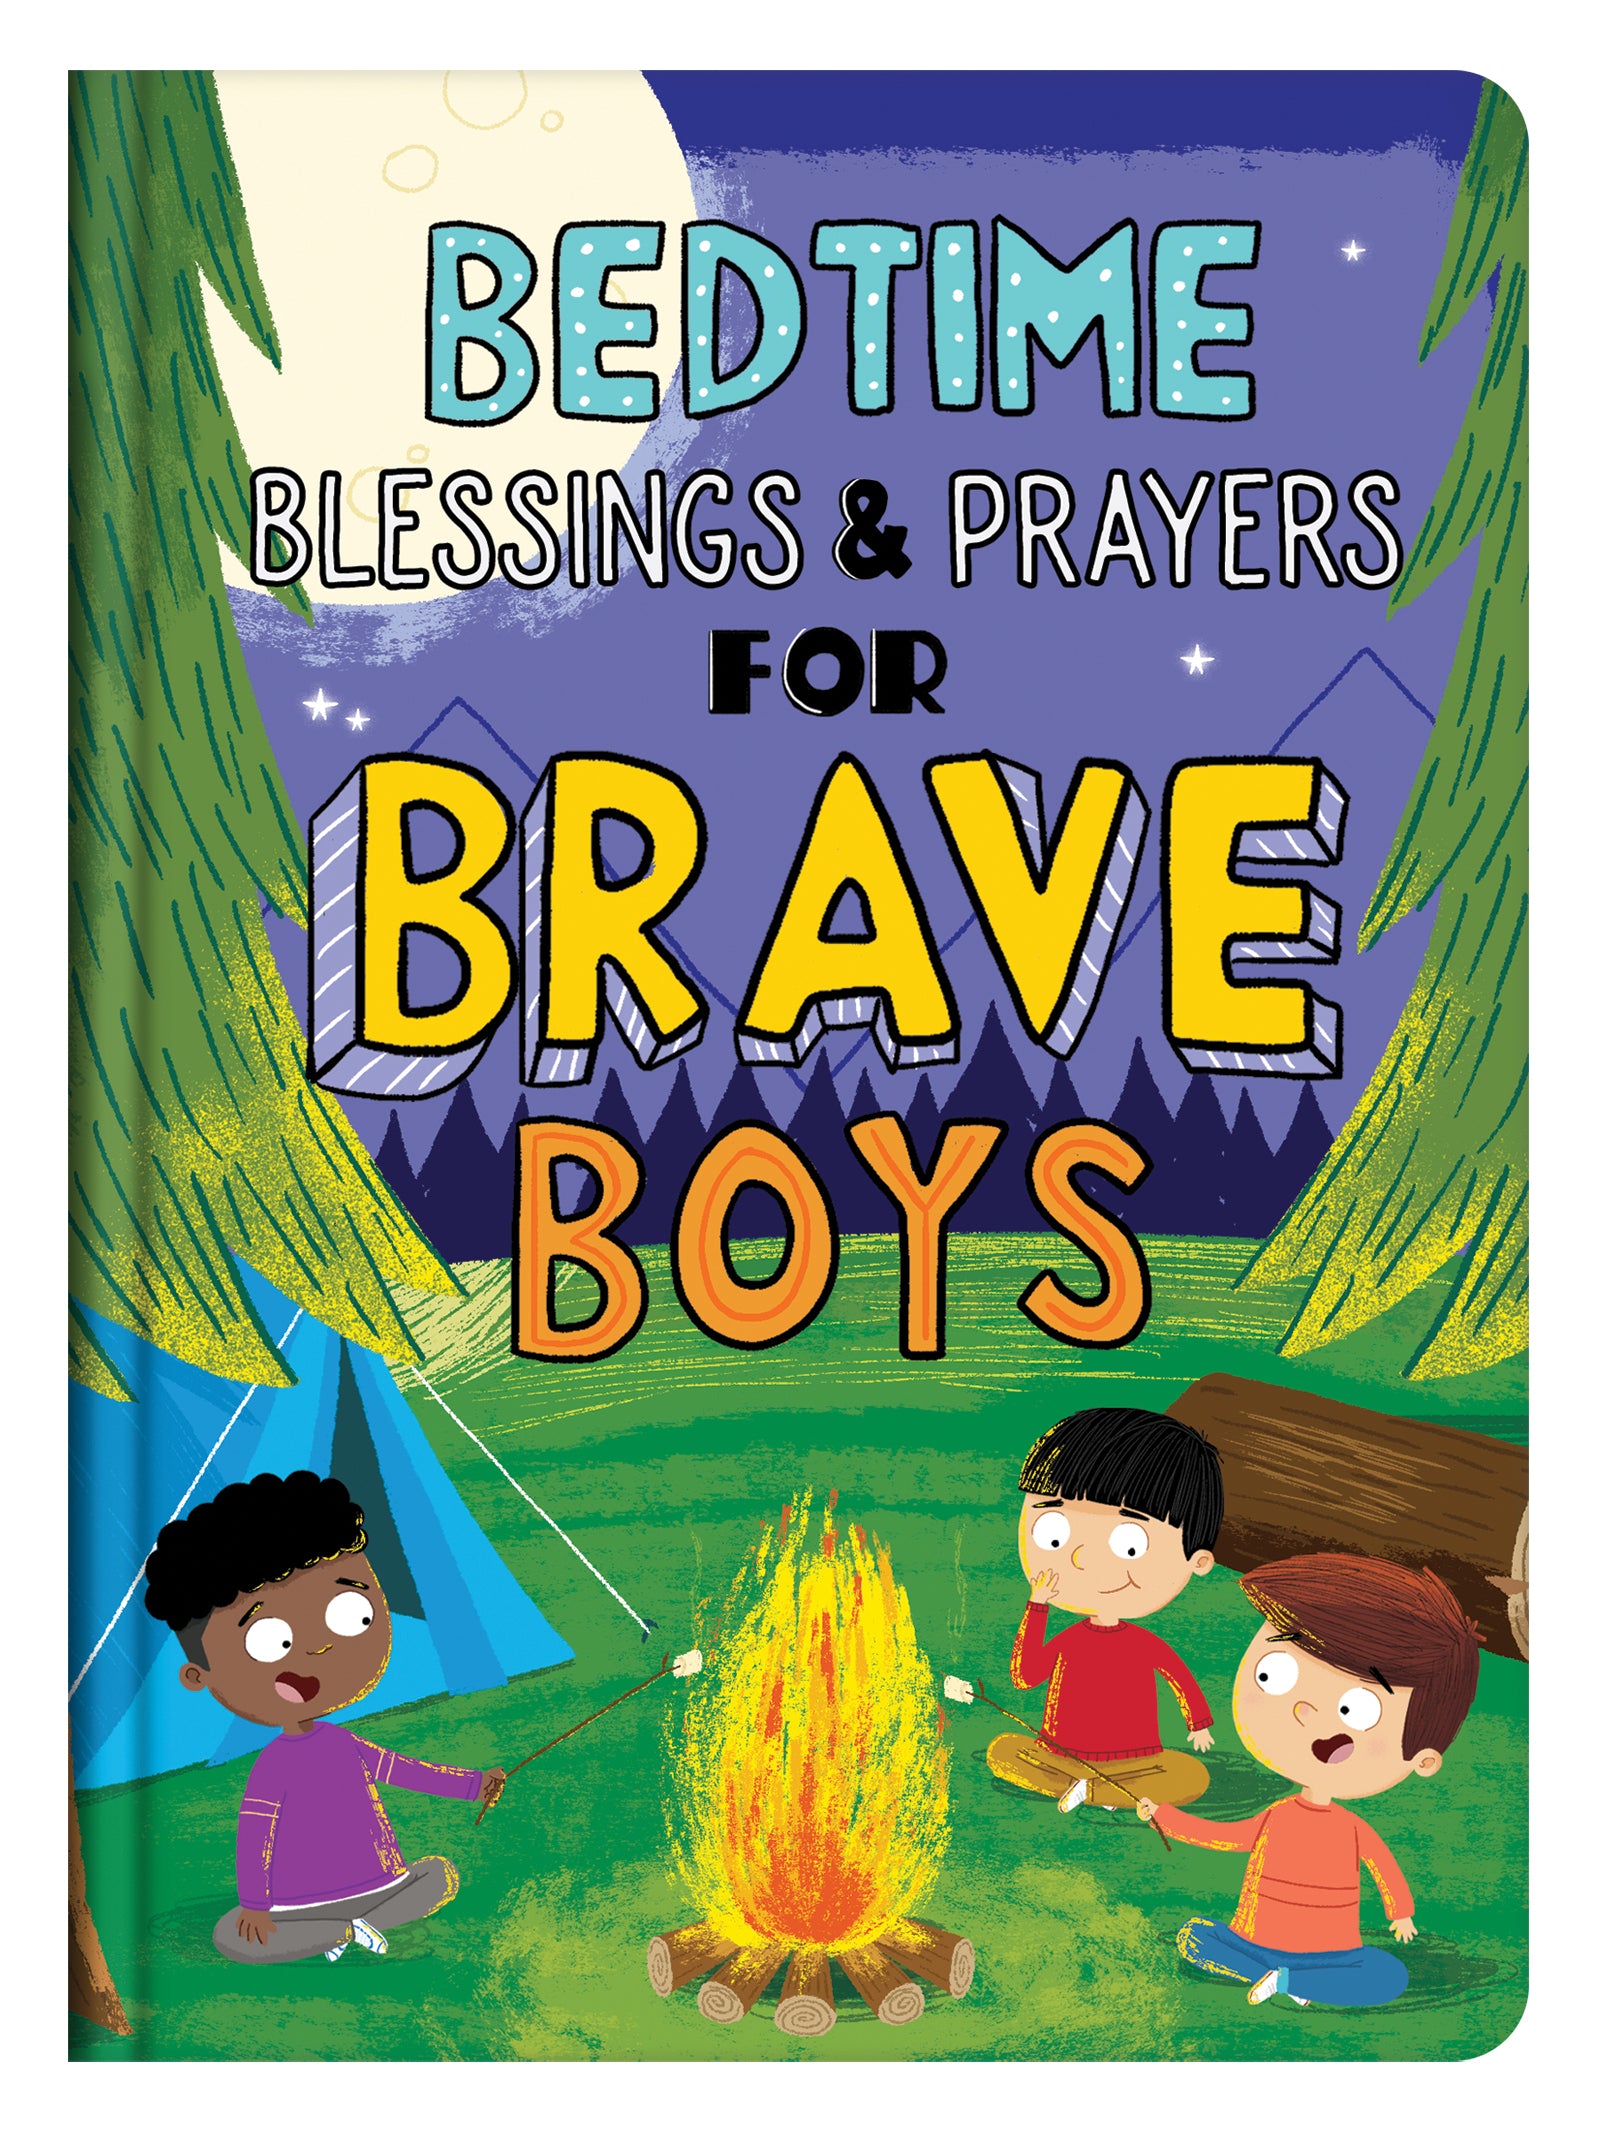 Bedtime Blessings and Prayers for Brave Boys - The Christian Gift Company